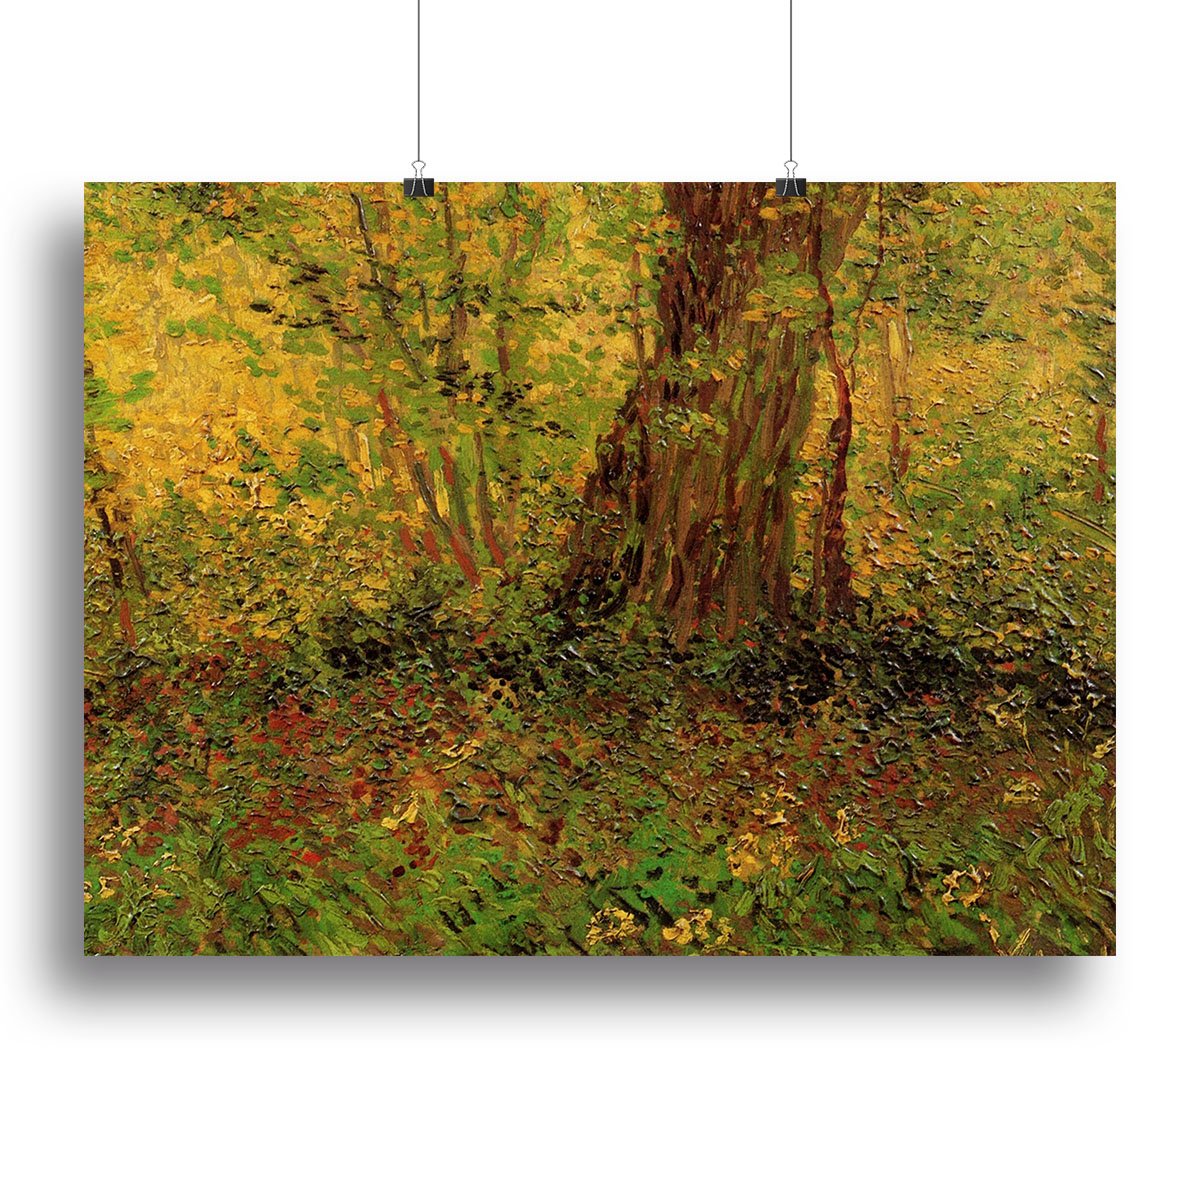 Undergrowth 2 by Van Gogh Canvas Print or Poster